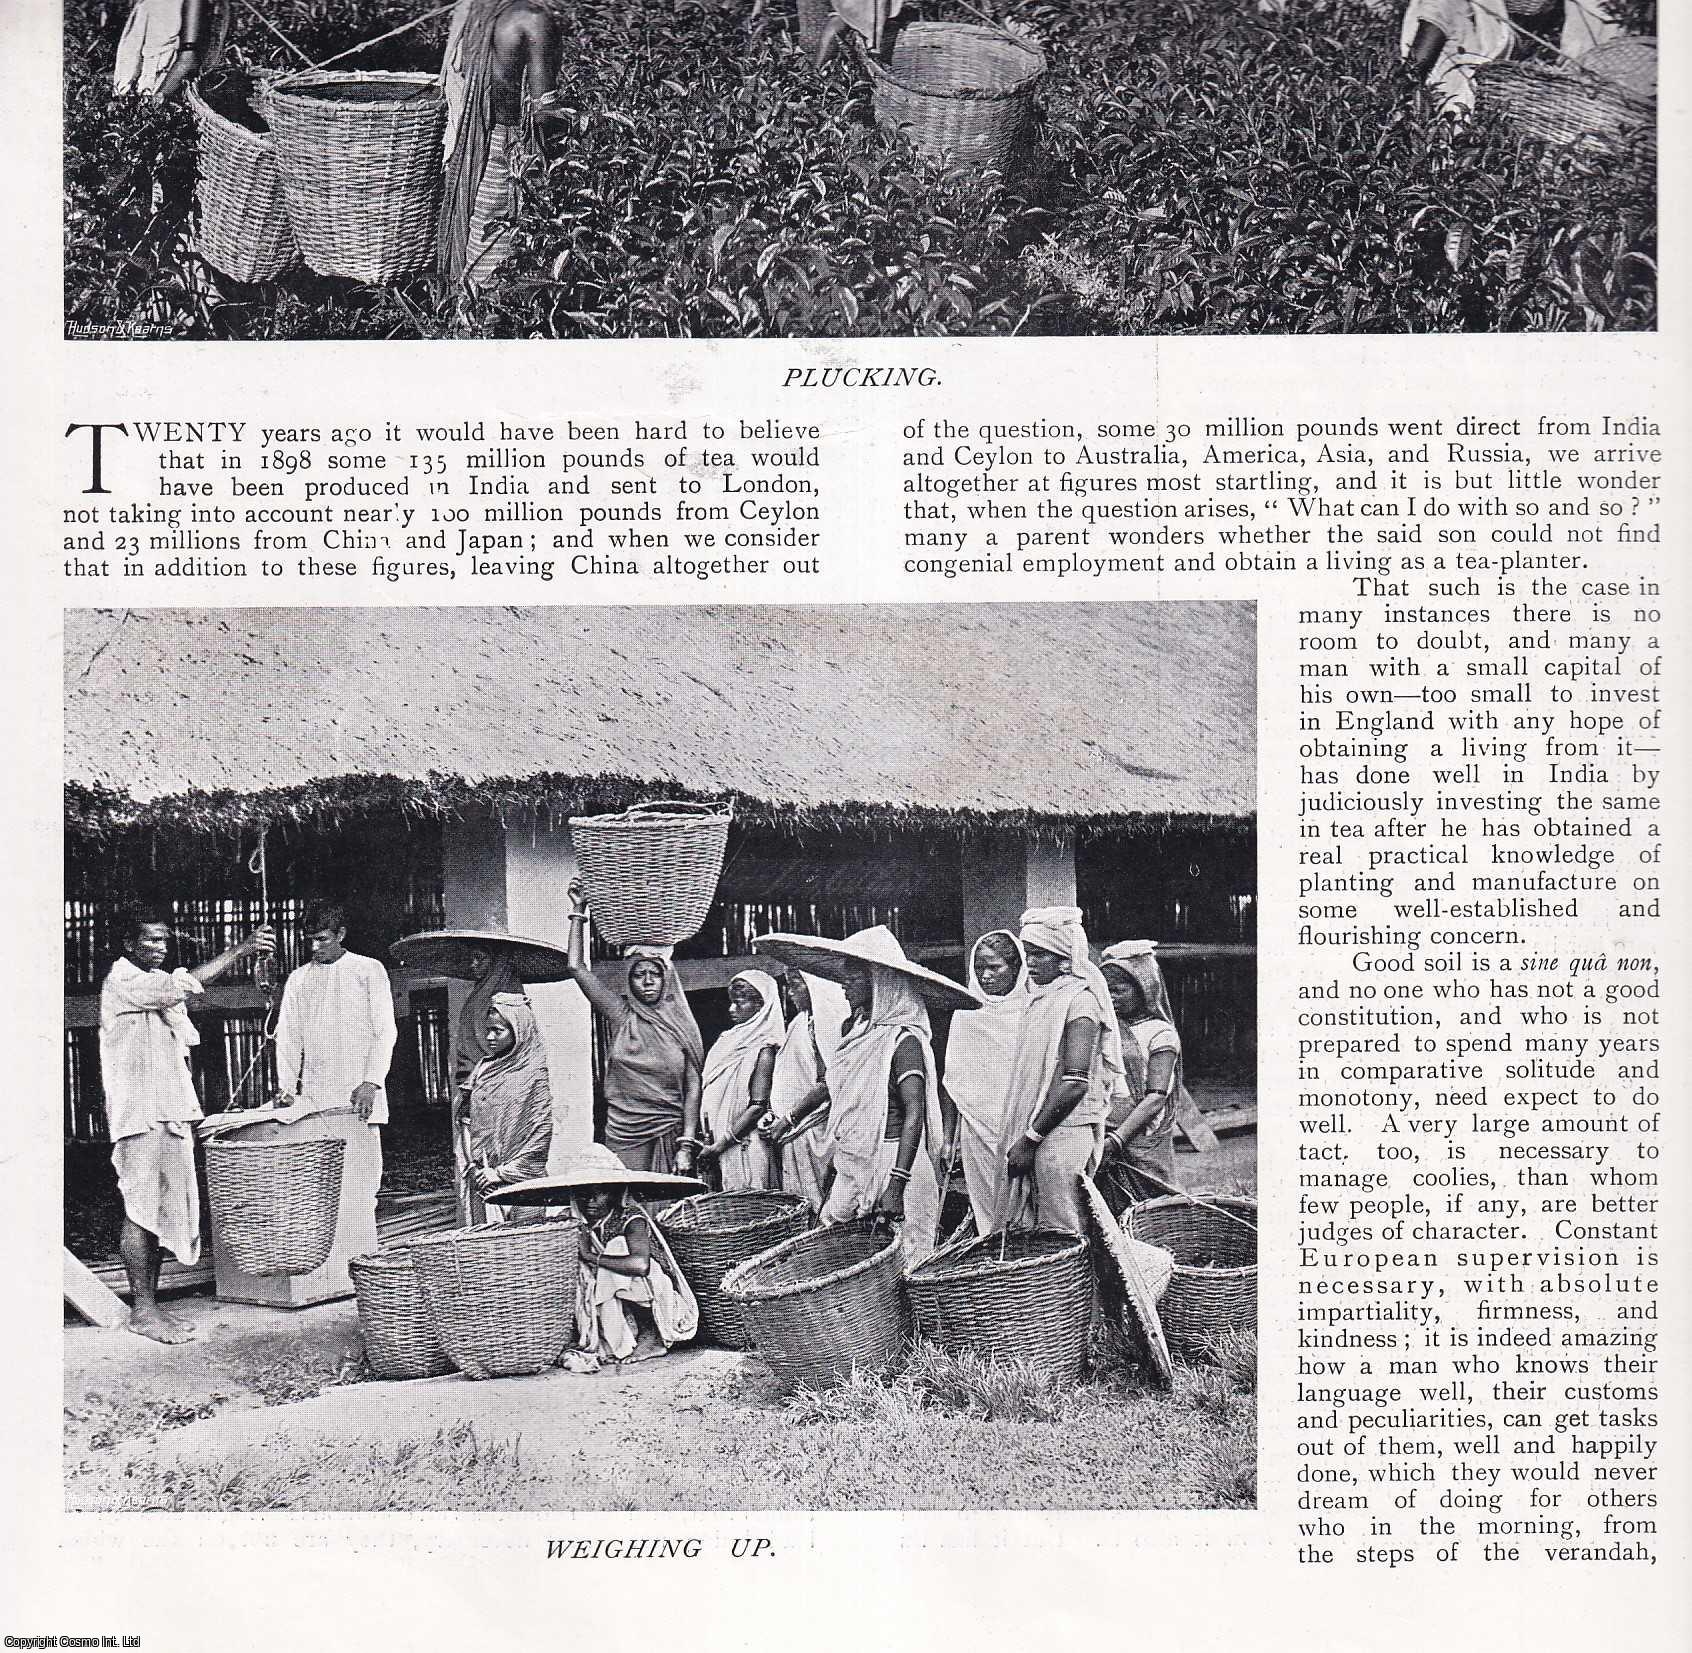 COUNTRY LIFE - Tea-Planting in India. Several pictures and accompanying text, removed from an original issue of Country Life Magazine, 1899.